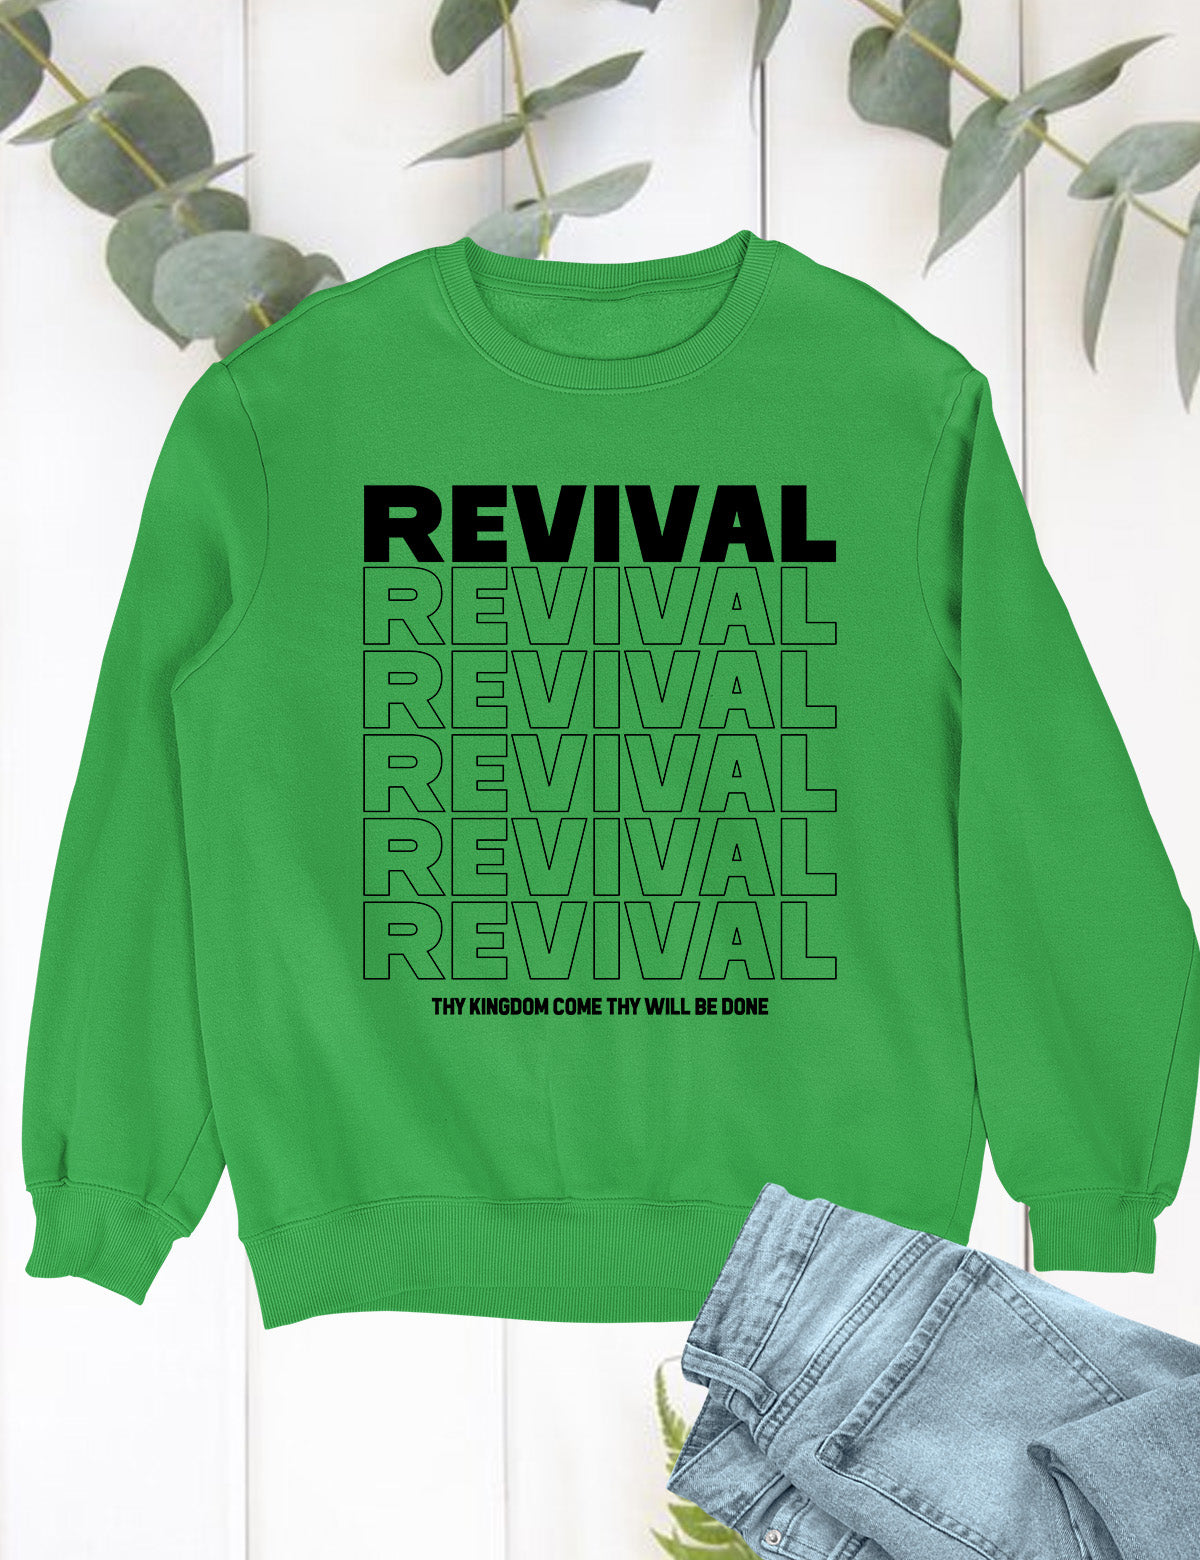 Christian Revival Jumpert Thy Kingdom Come Thy Will Be Done Sweatshirt